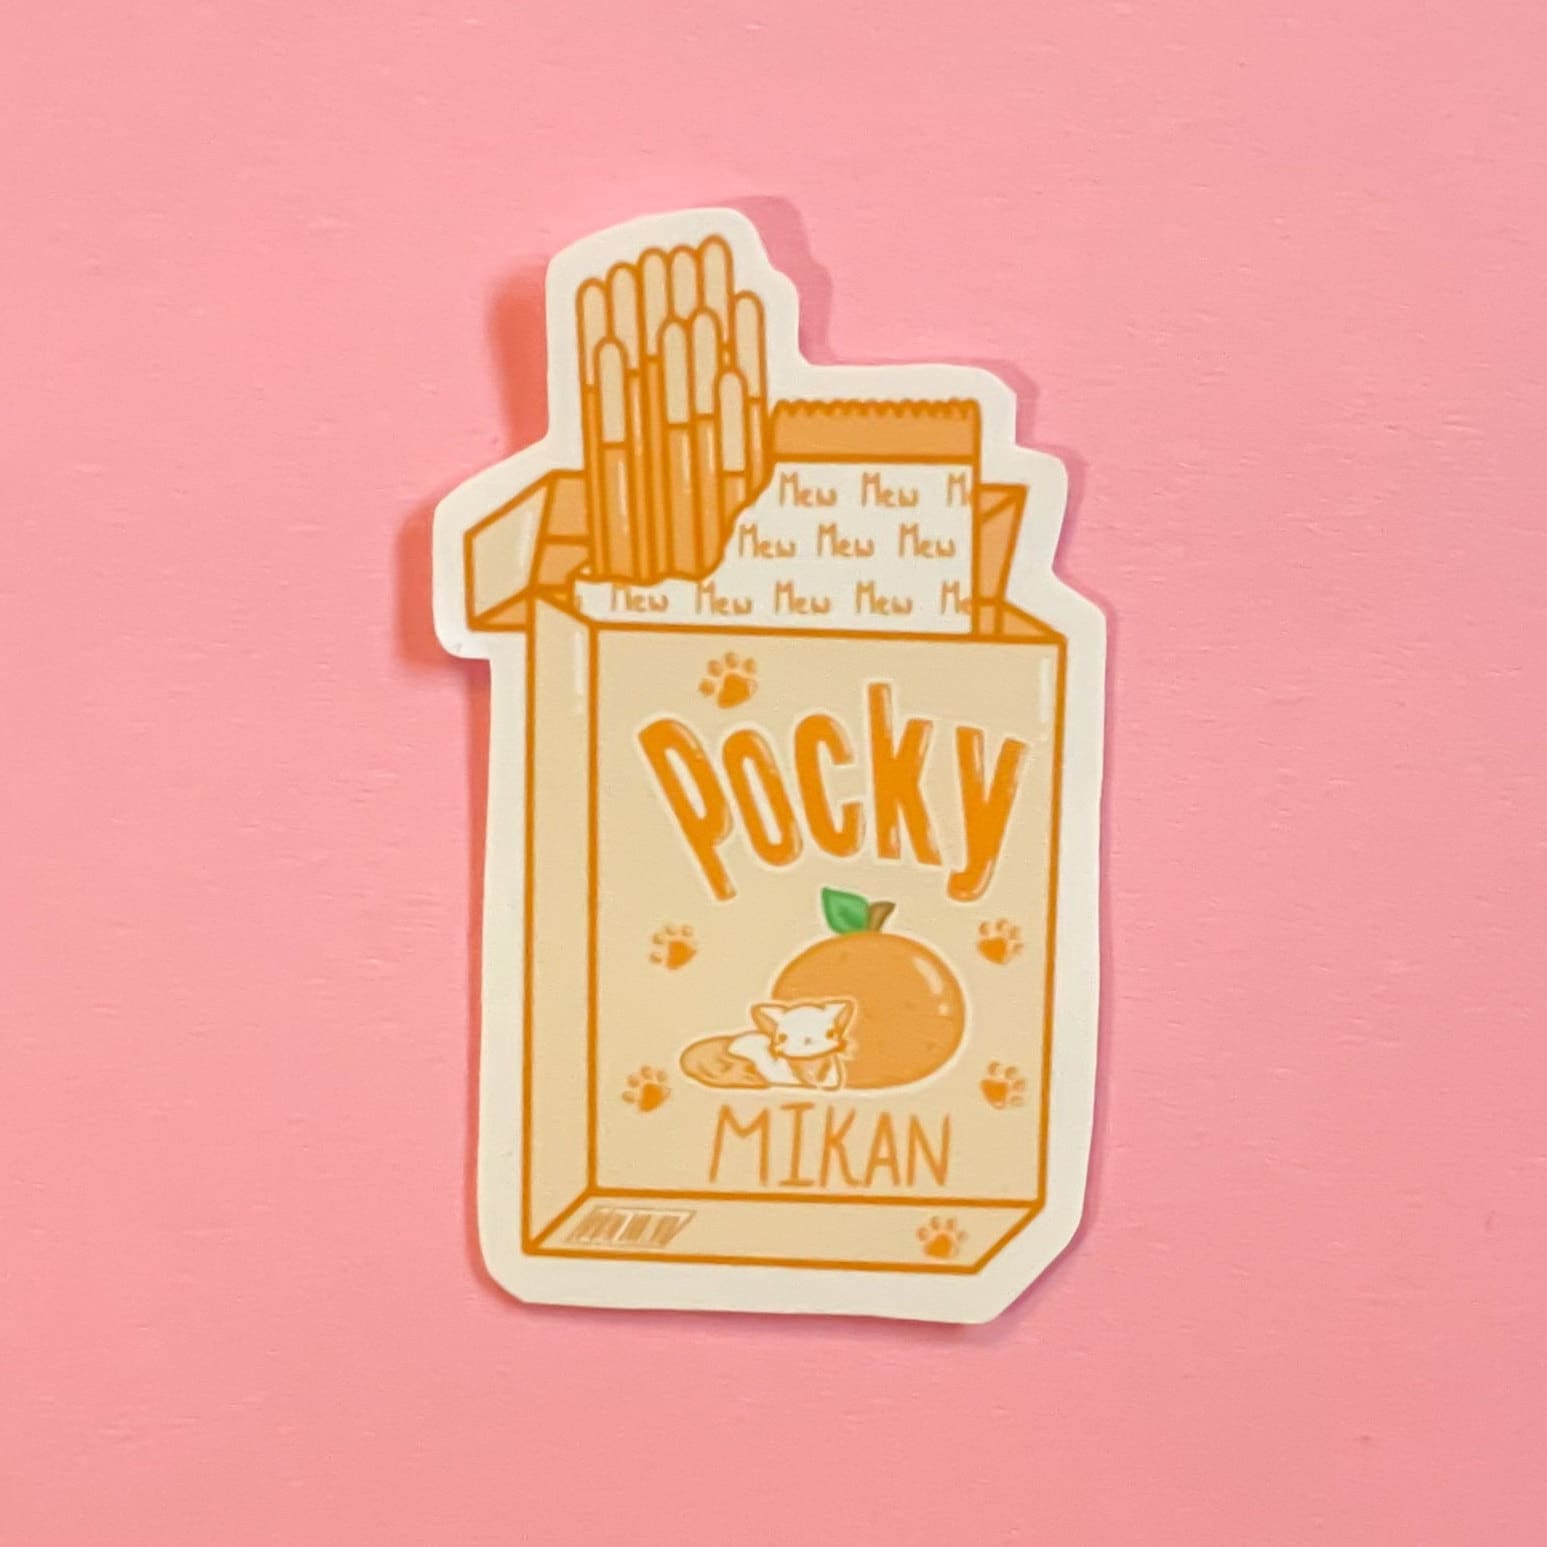 Sticker of a hand holding a pack of pocky with the words 